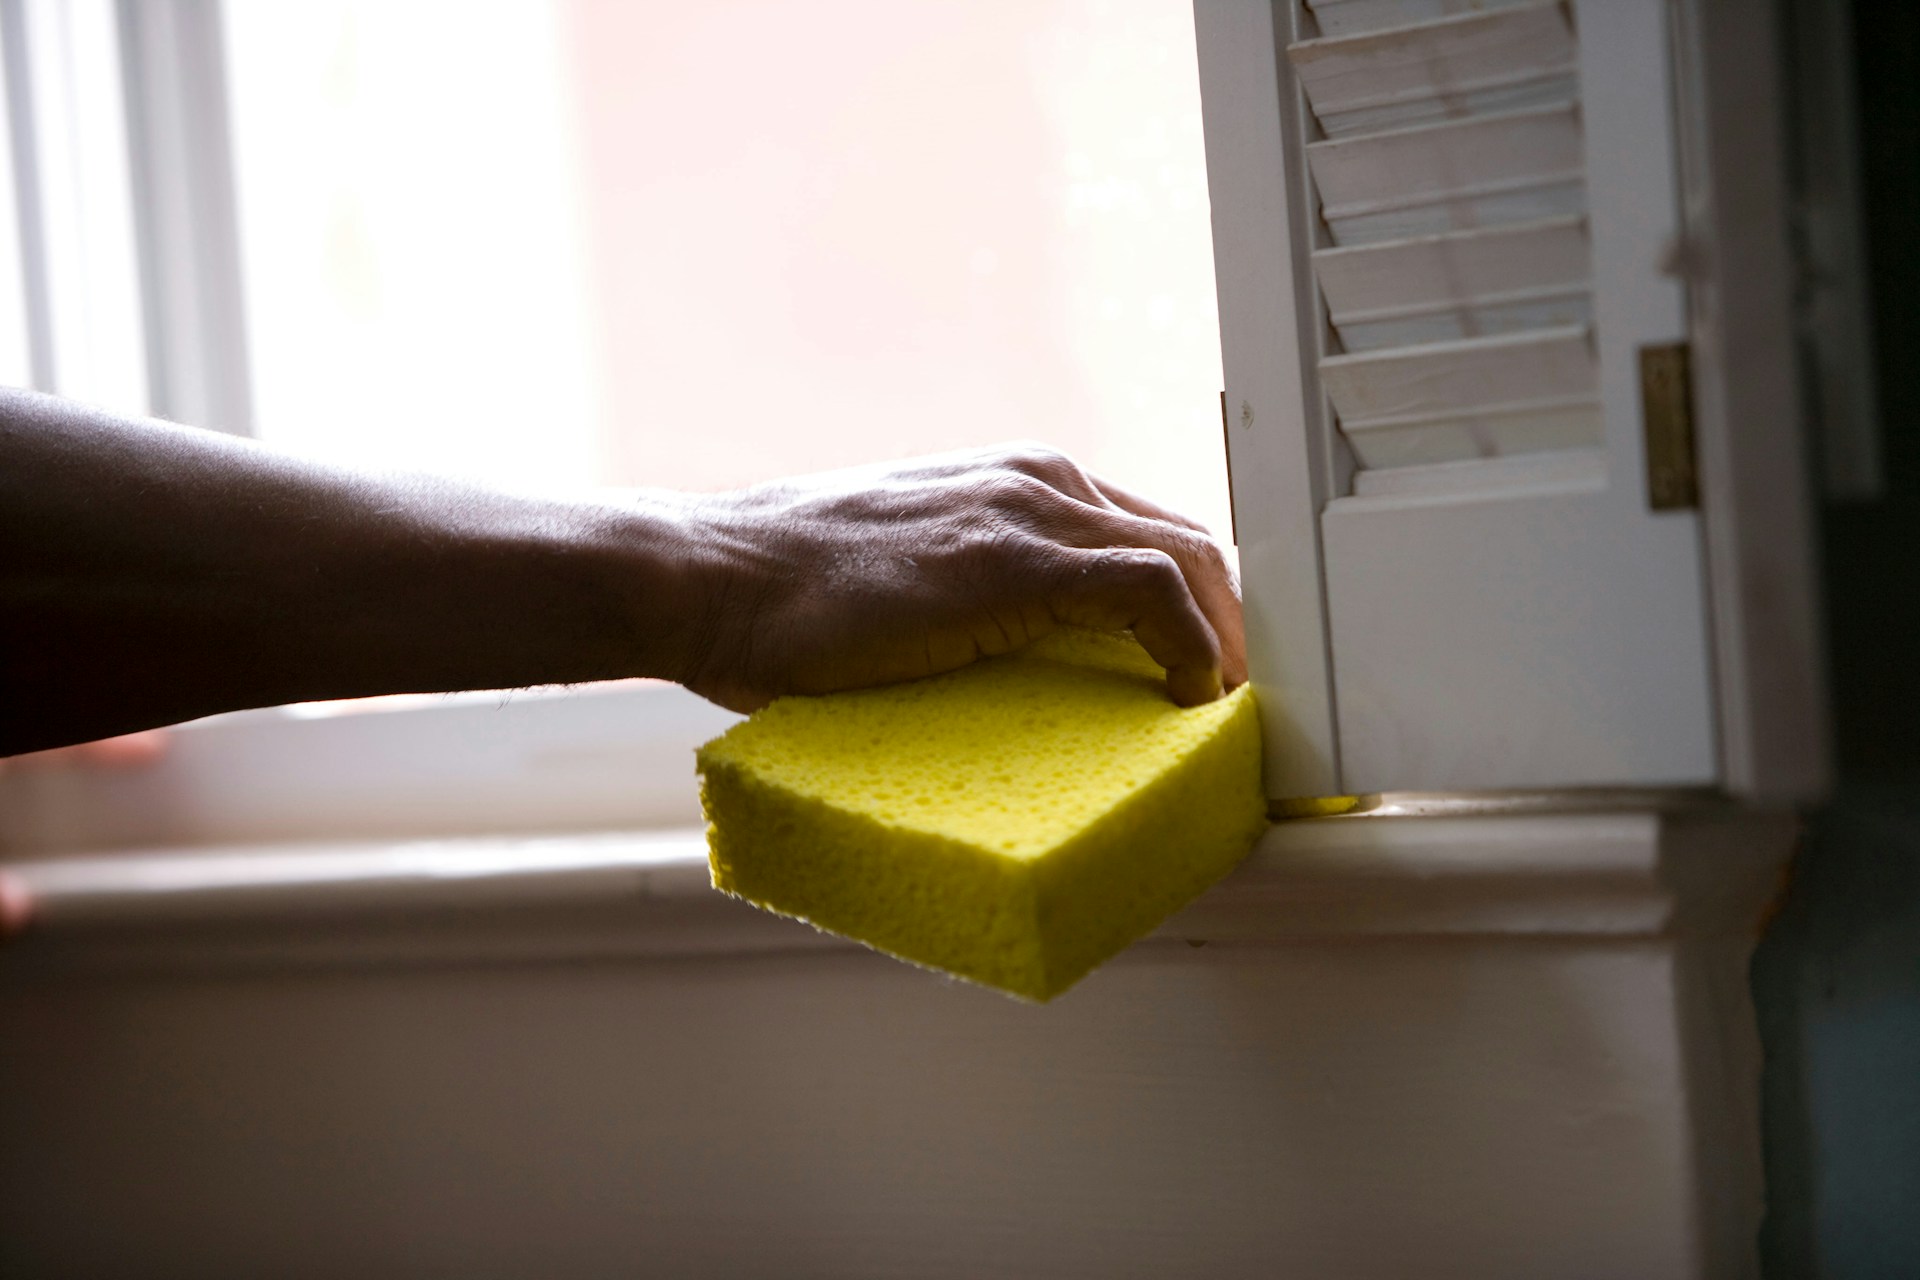 Person using a yellow sponge to clean. Image by Unsplash